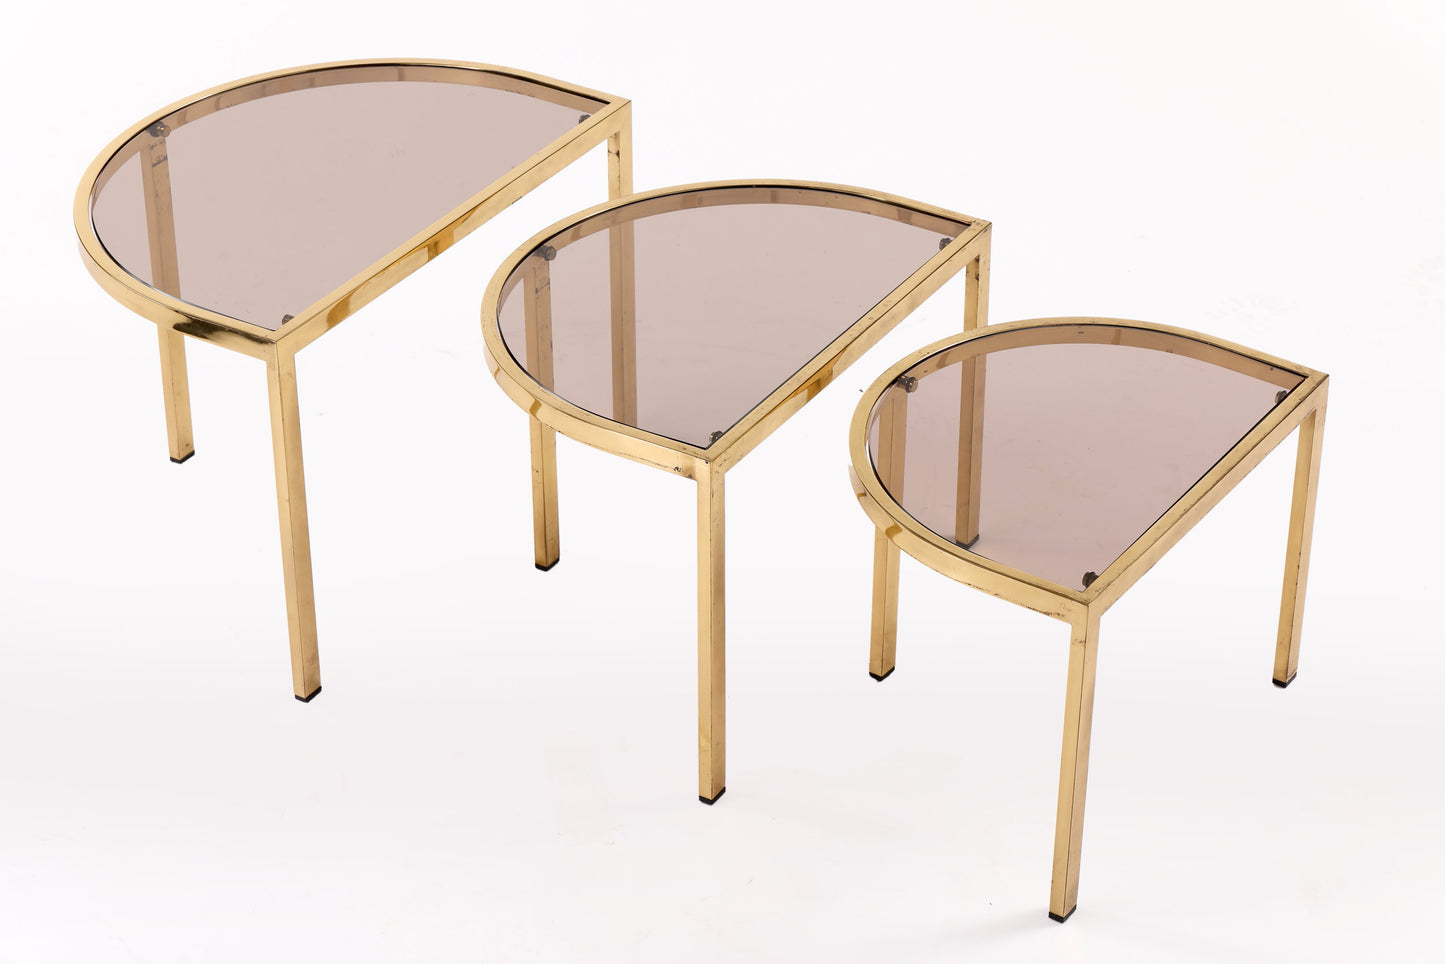 Triptych half-moon tables from the 70s